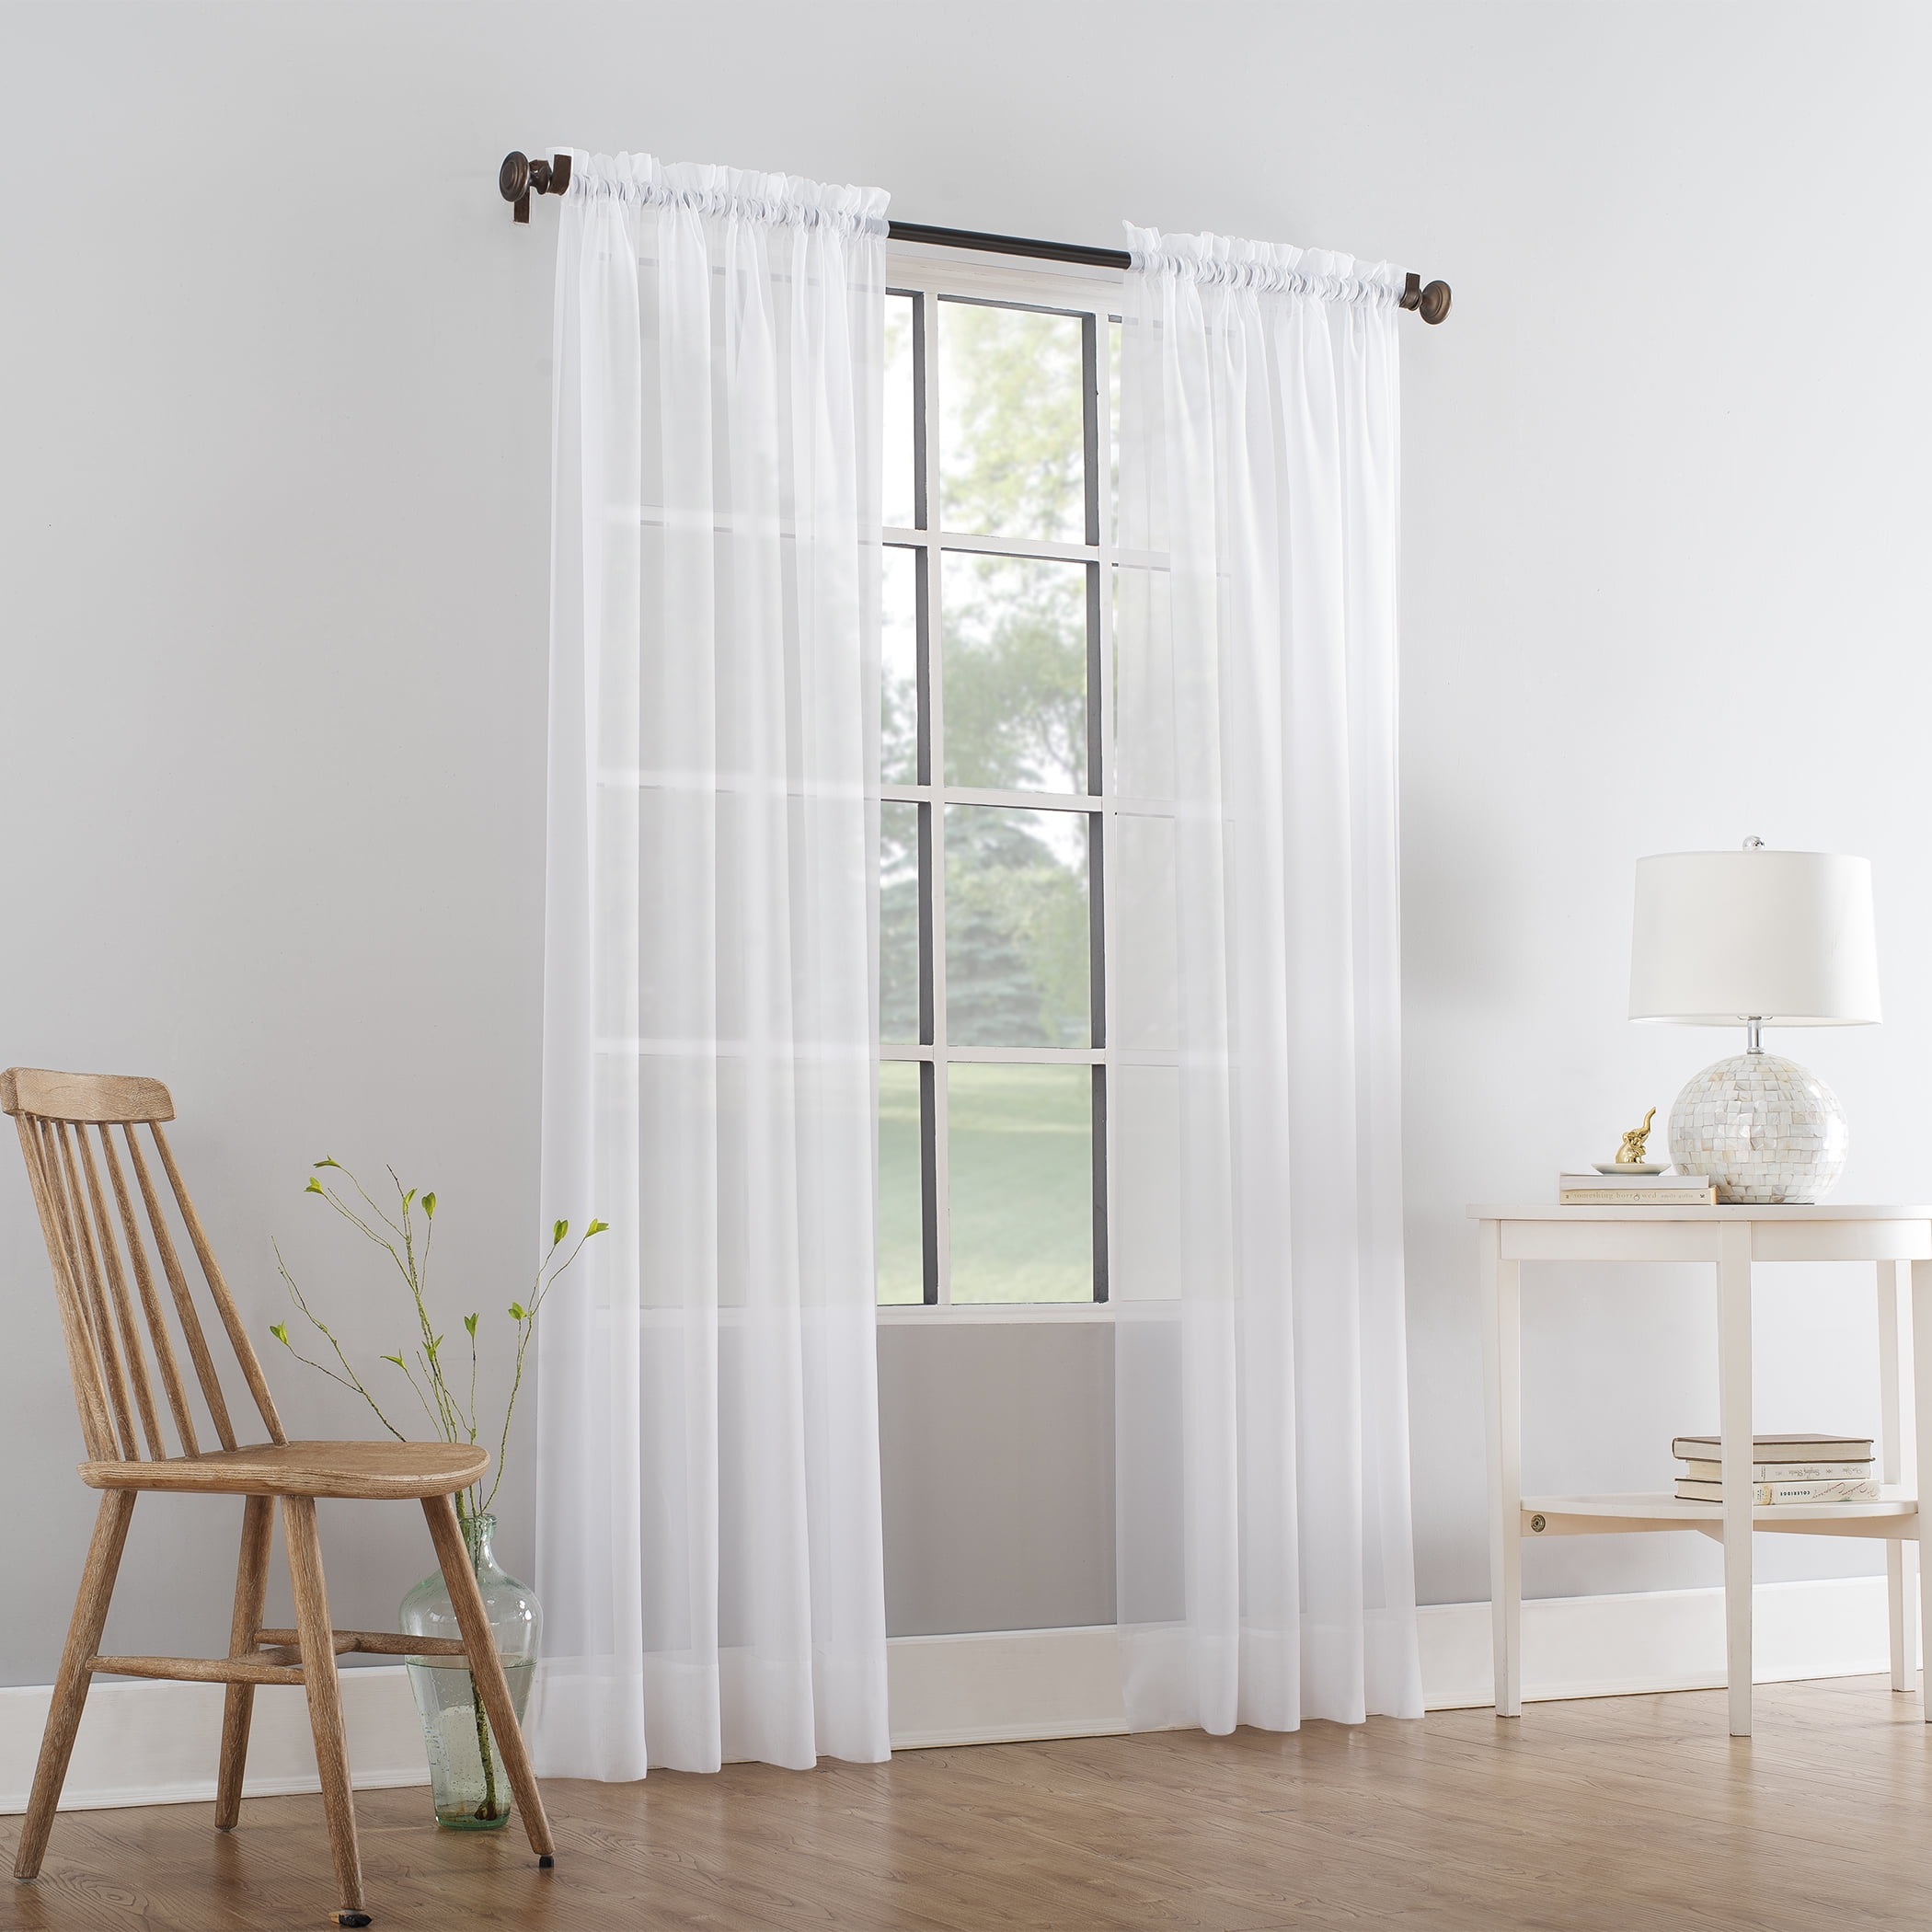 1PC SINGLE STYLE GROMMET TOP VALANCE/PANEL WINDOW CURTAIN VOILE SHEER S38 